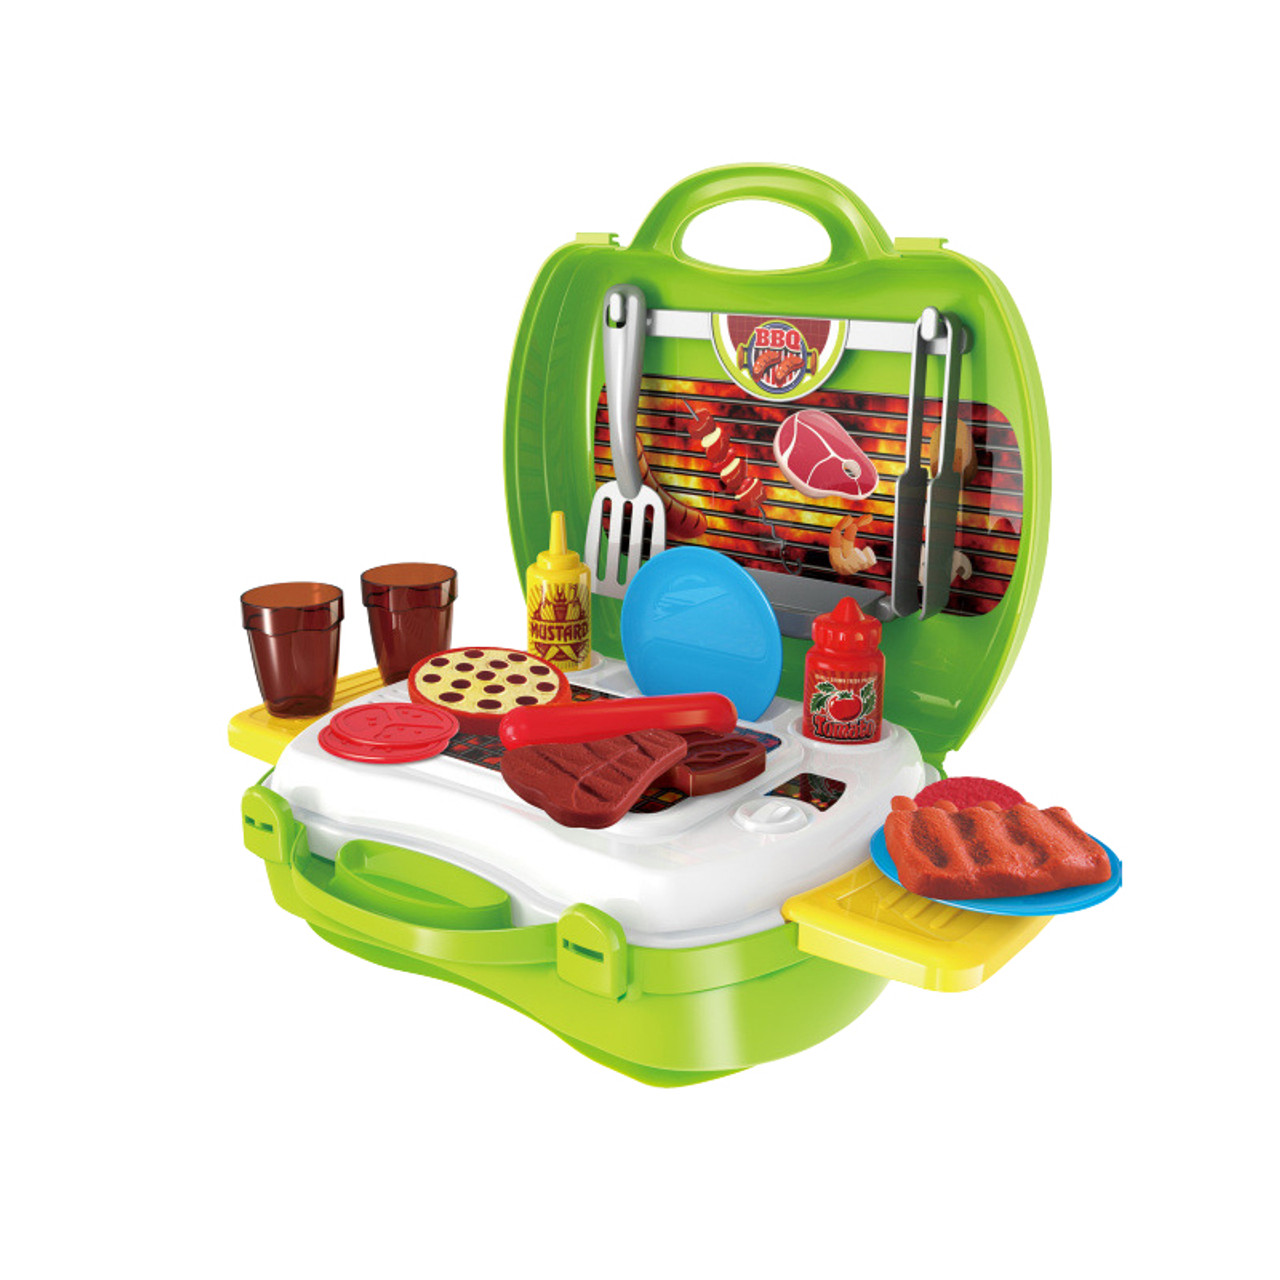 Pretend Play Kitchen Set Toys Bbq Grill For Kid Toddler Children Food Cooking